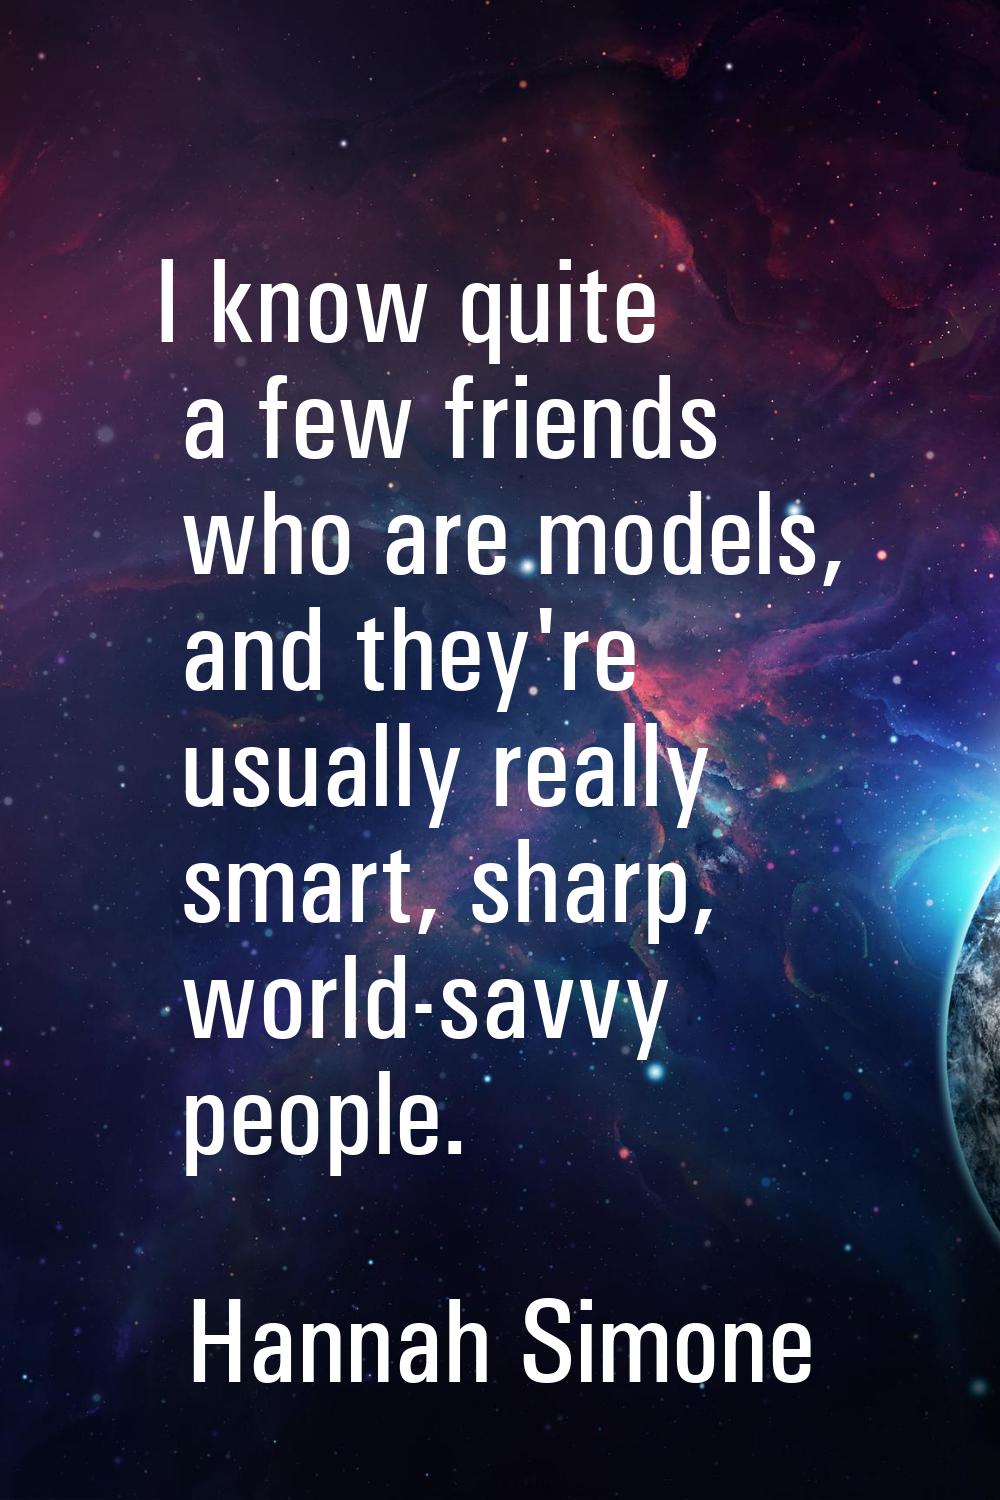 I know quite a few friends who are models, and they're usually really smart, sharp, world-savvy peo